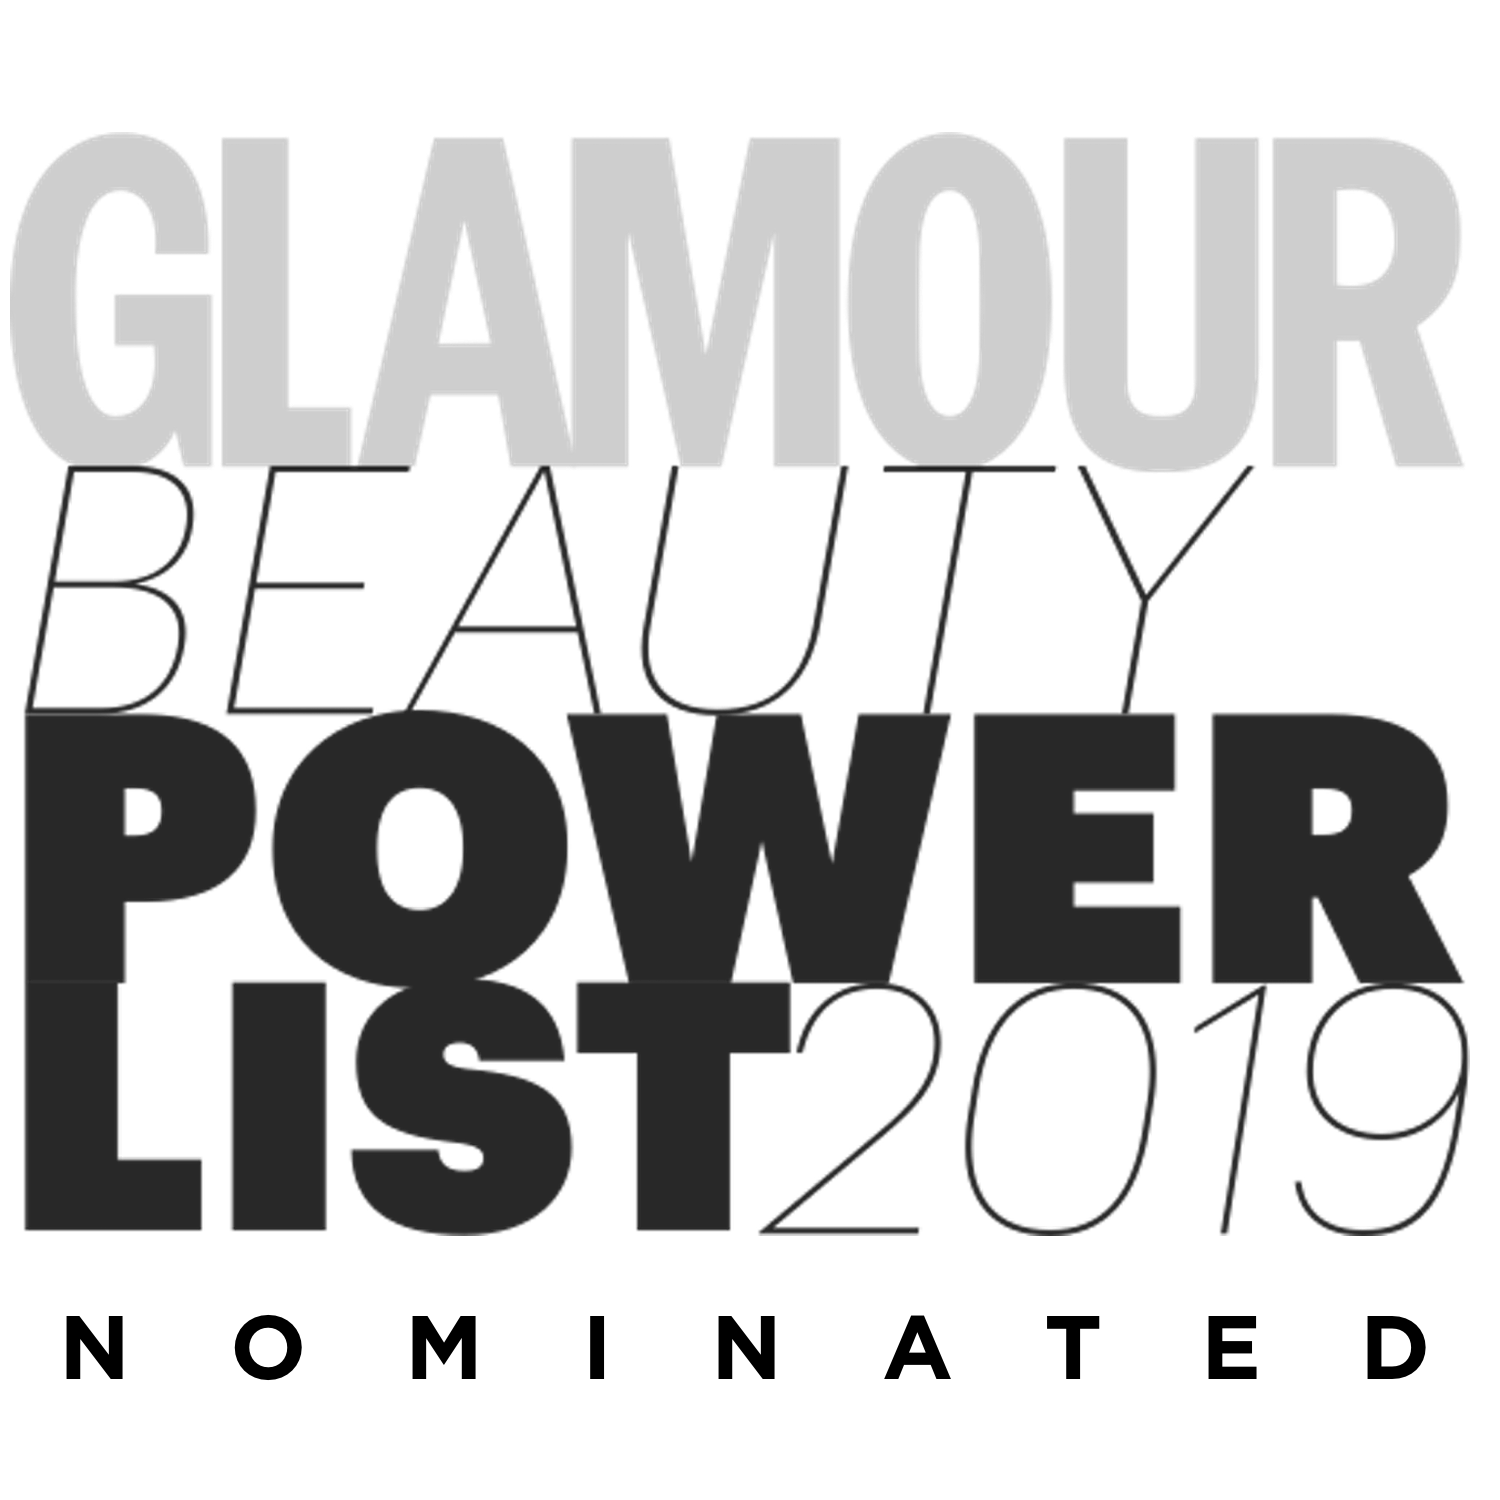 Dr Sam's nominated for Glamour Beauty Power List 2019 awards